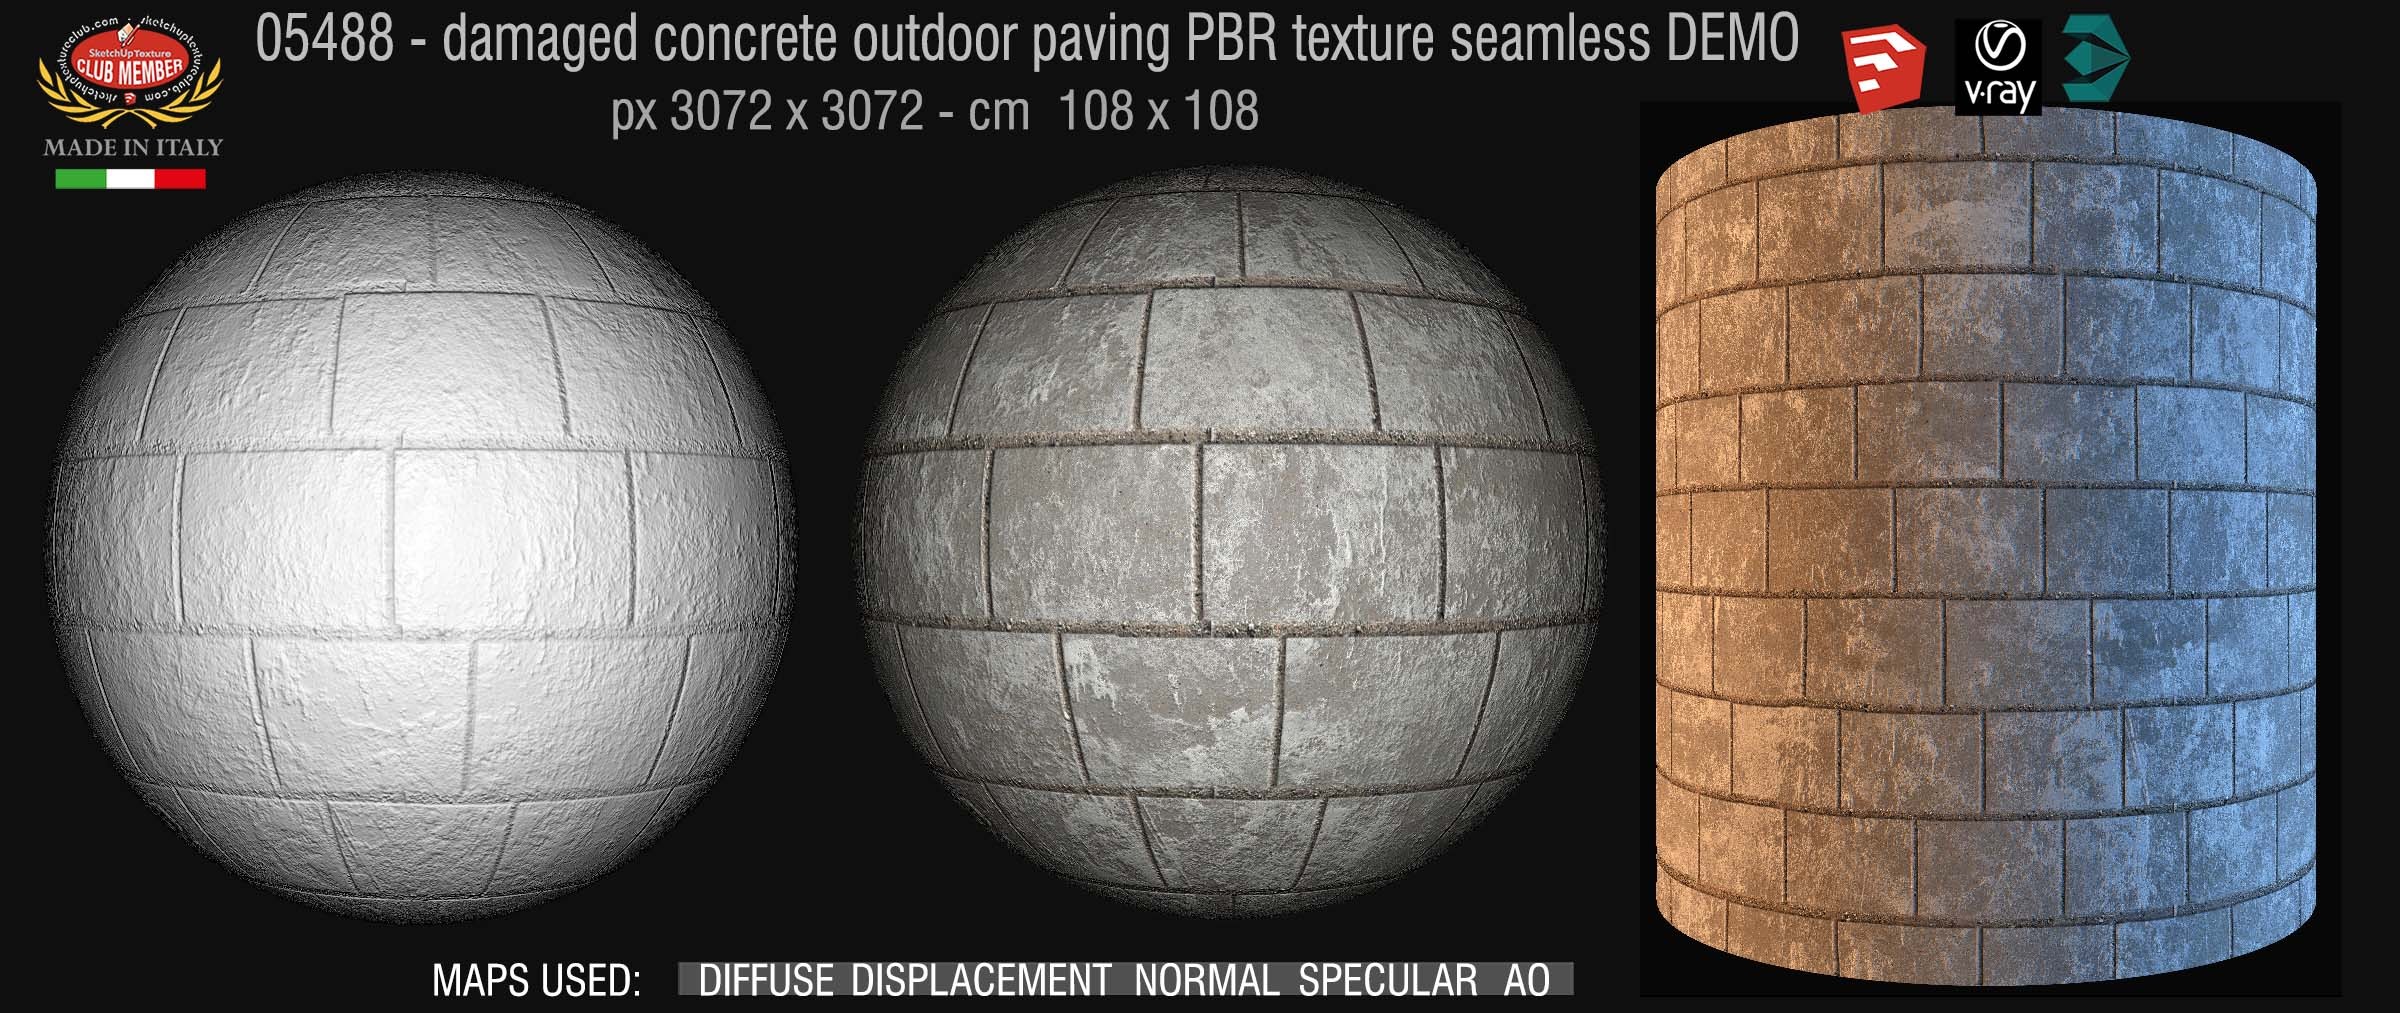 05488 Damaged concrete outdoor paving PBR texture seamless DEMO